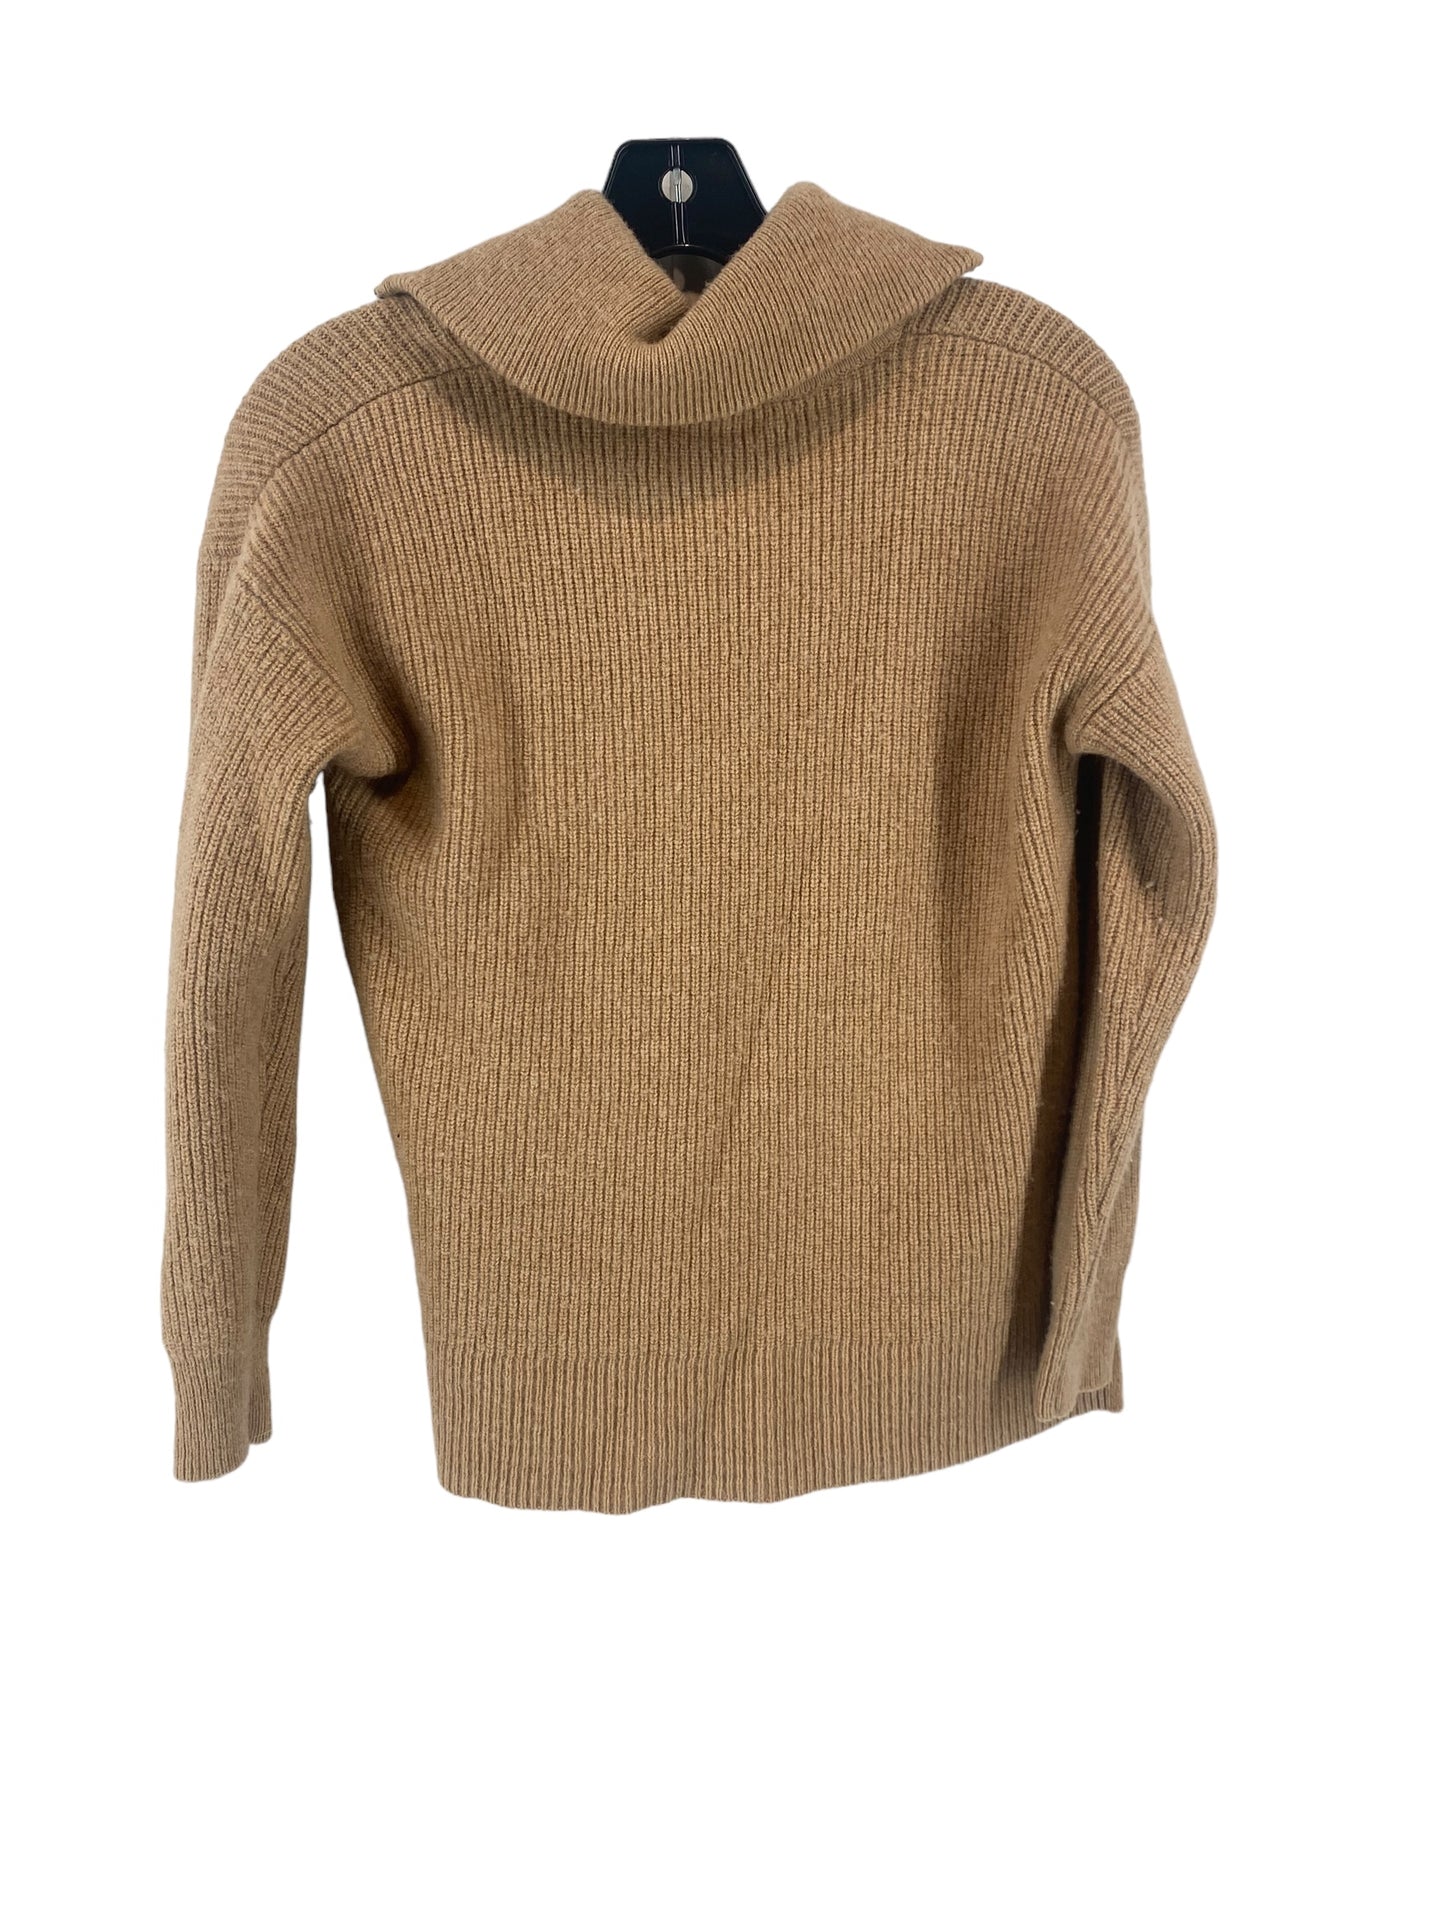 Brown Sweater Madewell, Size Xs